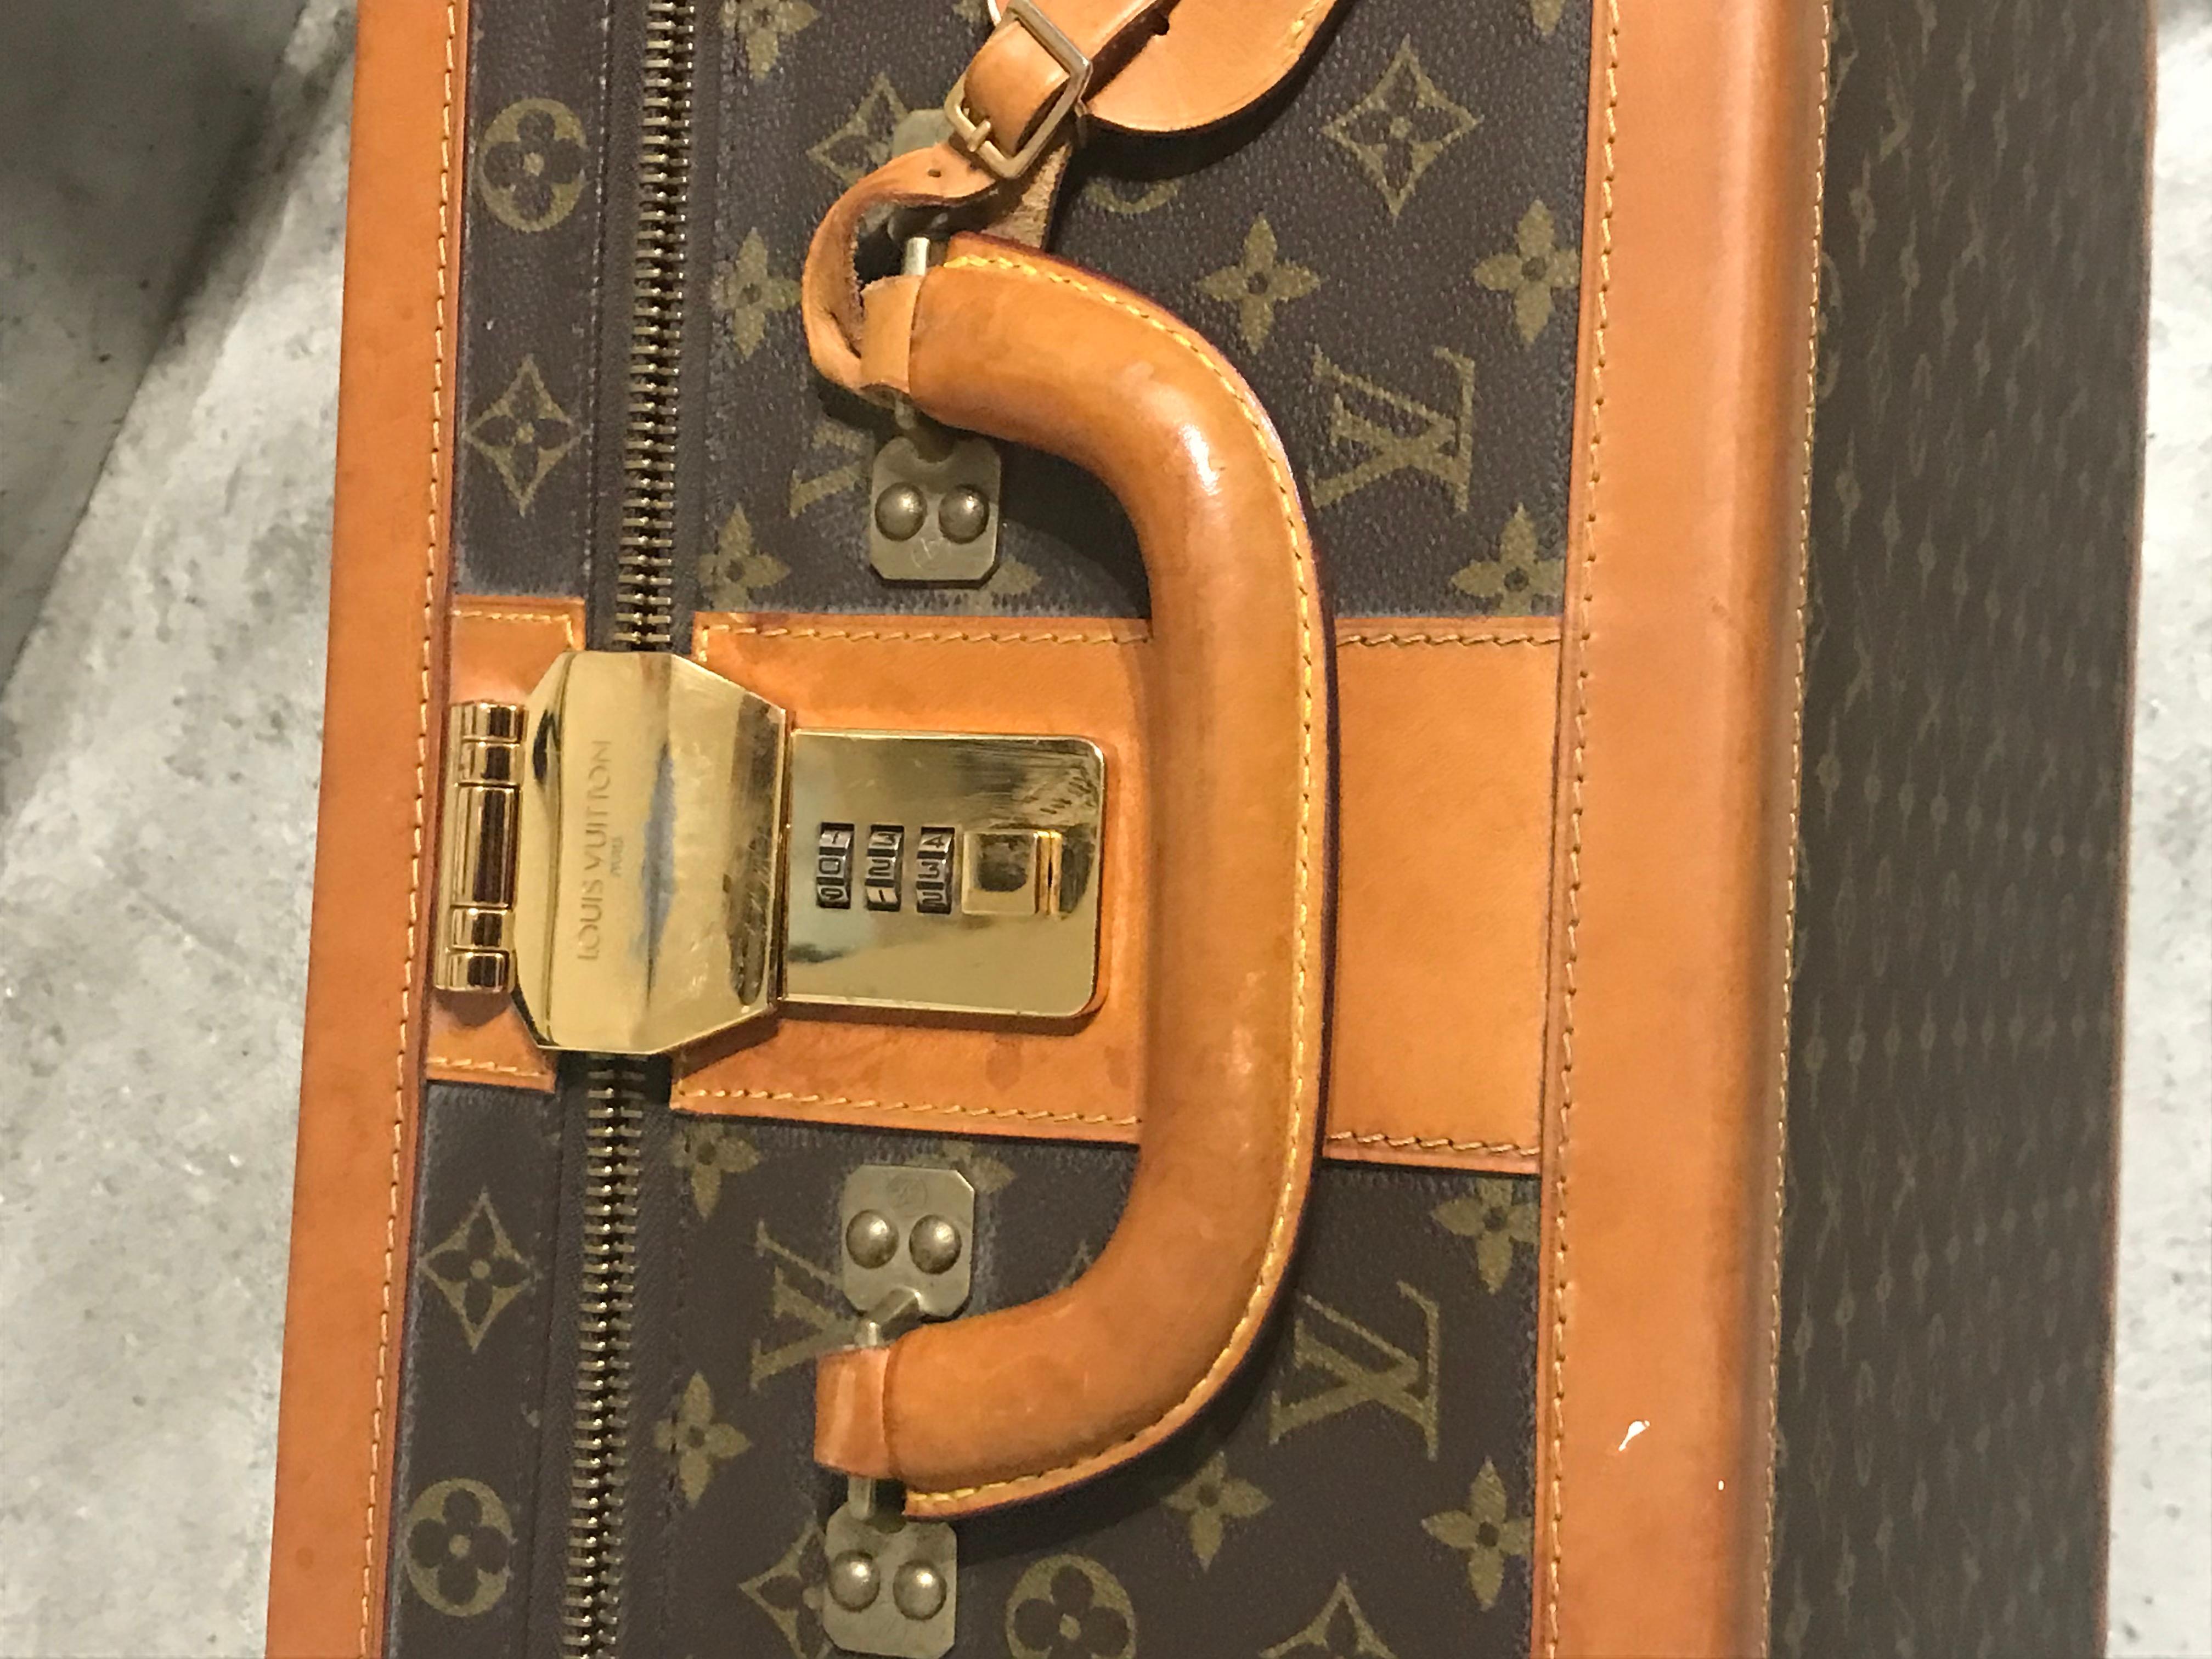 Louis Vuitton stratos 70 suitcase in monogram canvas.
Size 70x46x22 cm
Good vintage condition but presents many signs of wear . Interior however  really clean. Some part of the interior is unglued due to its age ( easy to repair see image 5)
